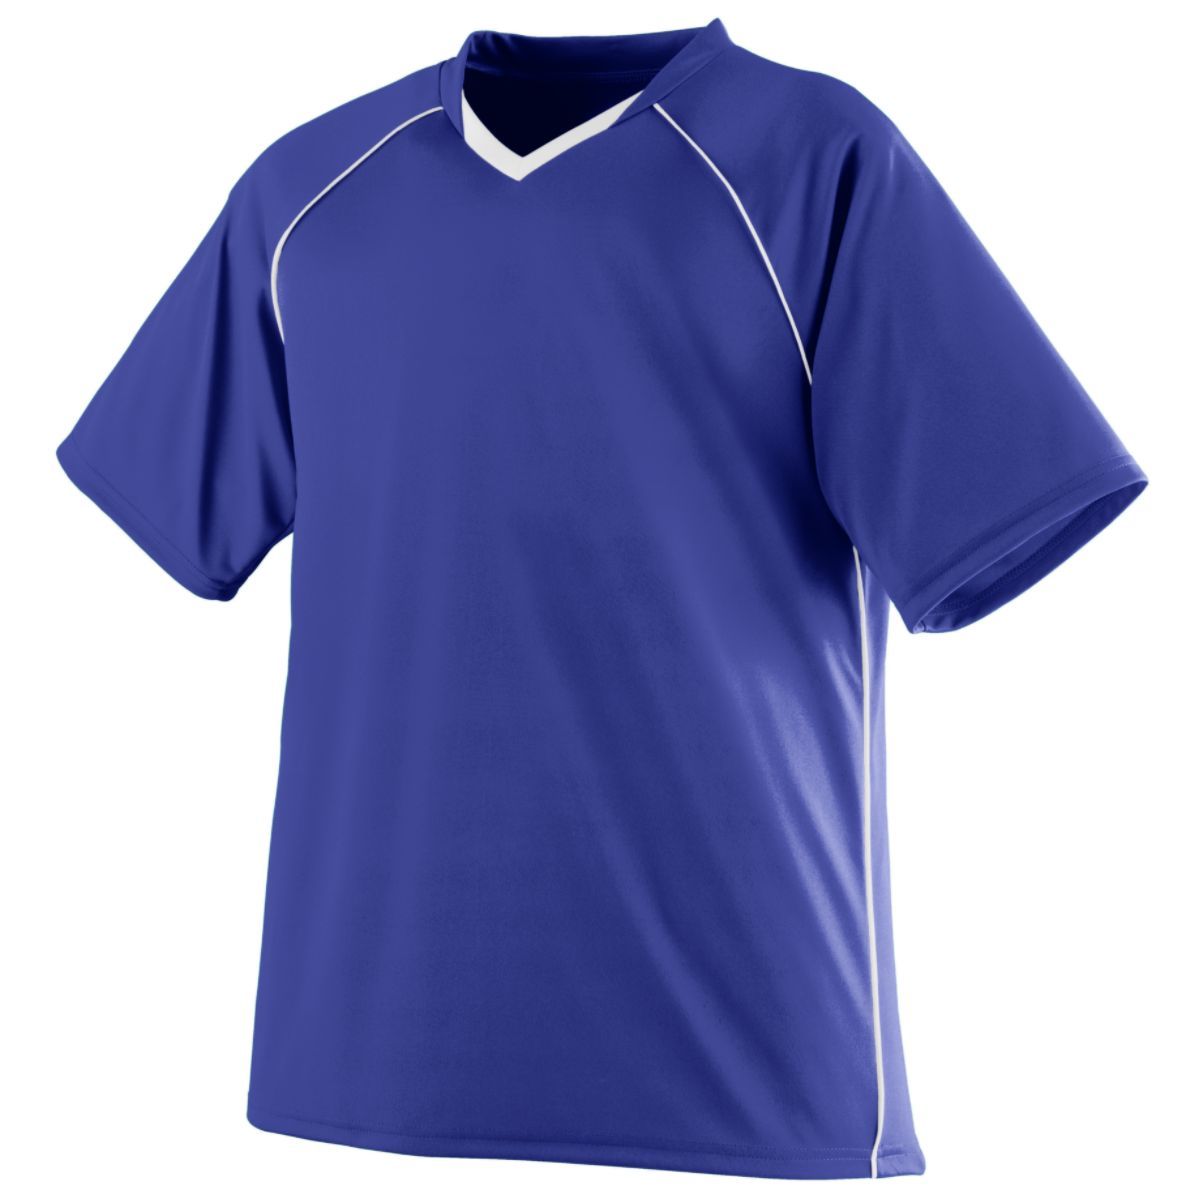 Augusta Sportswear Youth Striker Jersey in Purple/White  -Part of the Youth, Youth-Jersey, Augusta-Products, Soccer, Shirts, All-Sports-1 product lines at KanaleyCreations.com